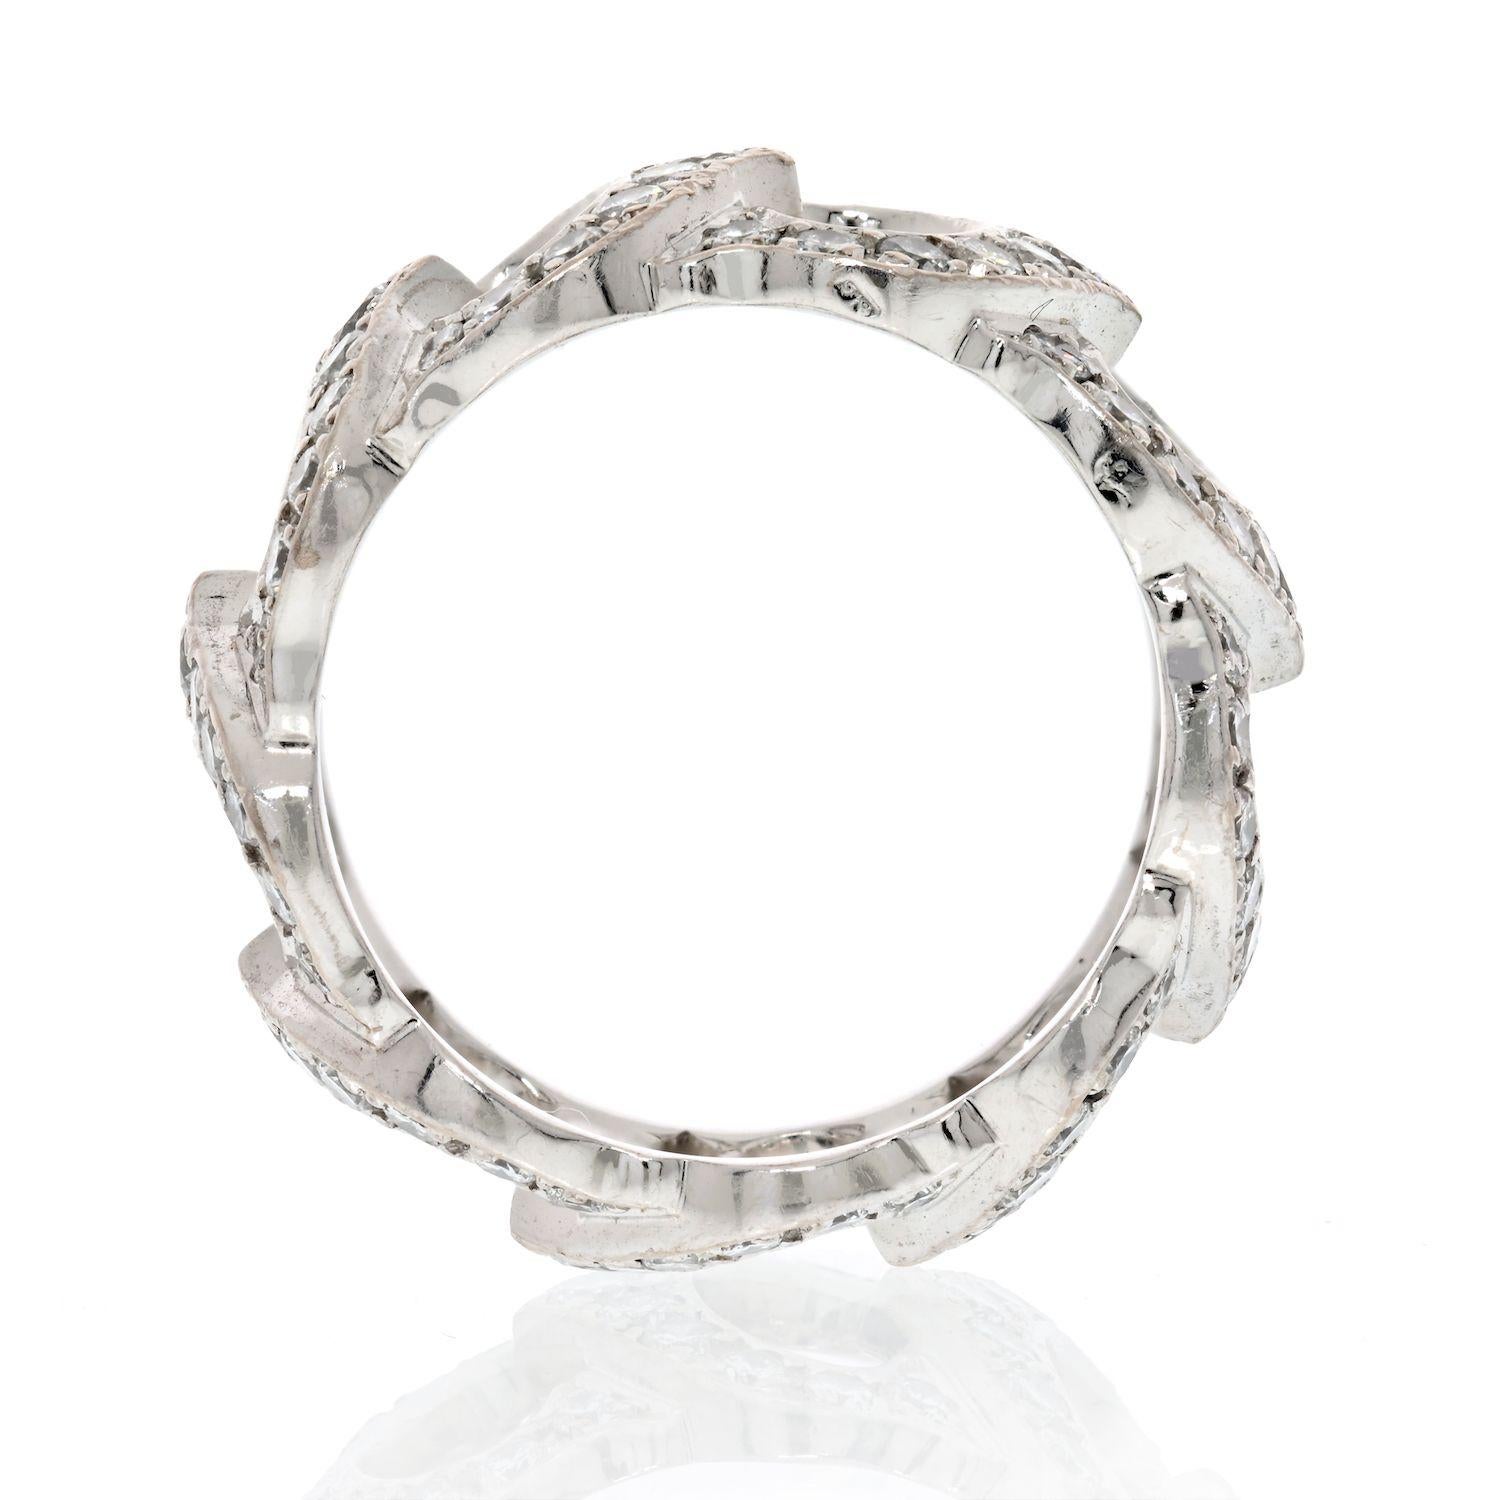 The ring is crafted of 18 karat white gold and features a C motif band set with round brilliant cut diamonds, approximately 2.00 total carat weight. This is a stunning ring with the iconic style of Cartier!
Please be advised that European size 54 is